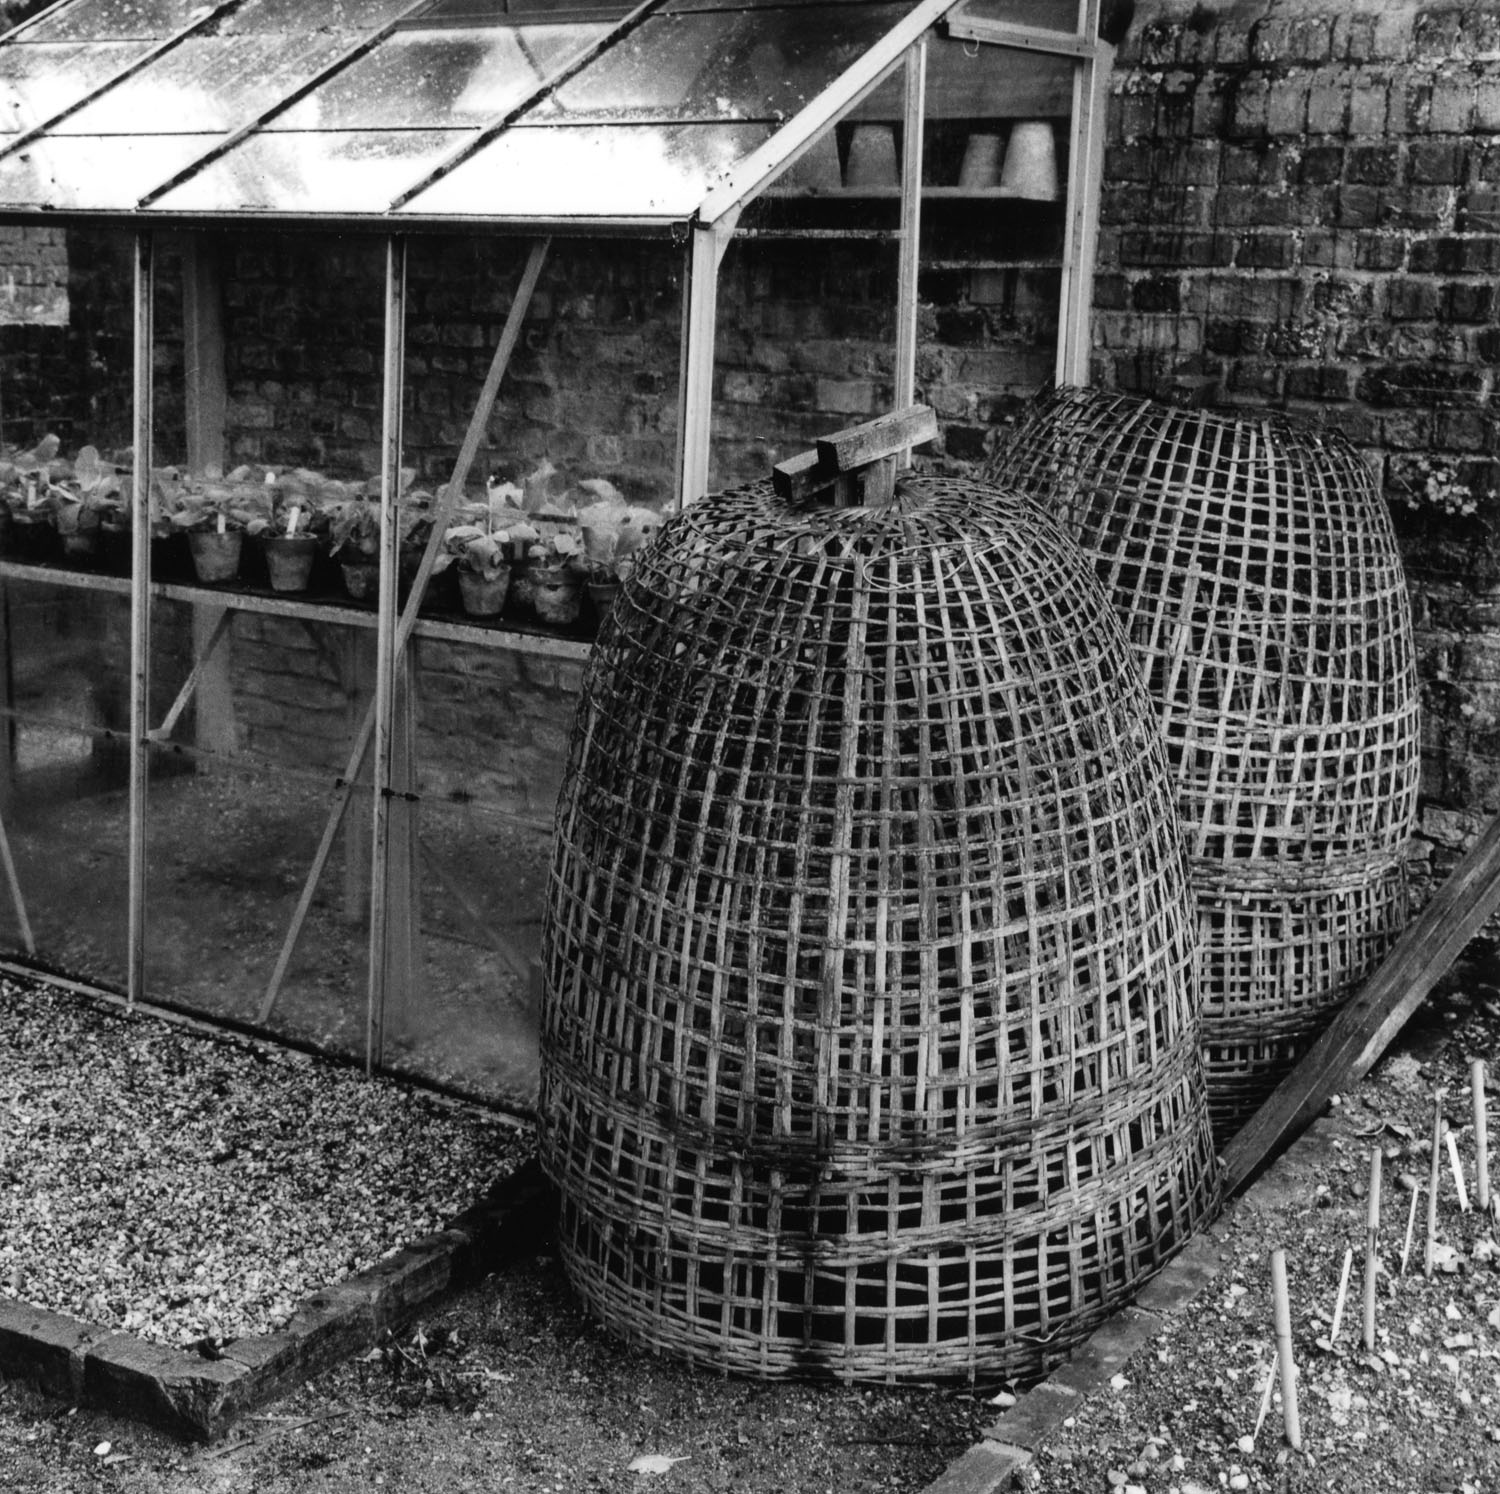 Woven Cloches, Hatfield House